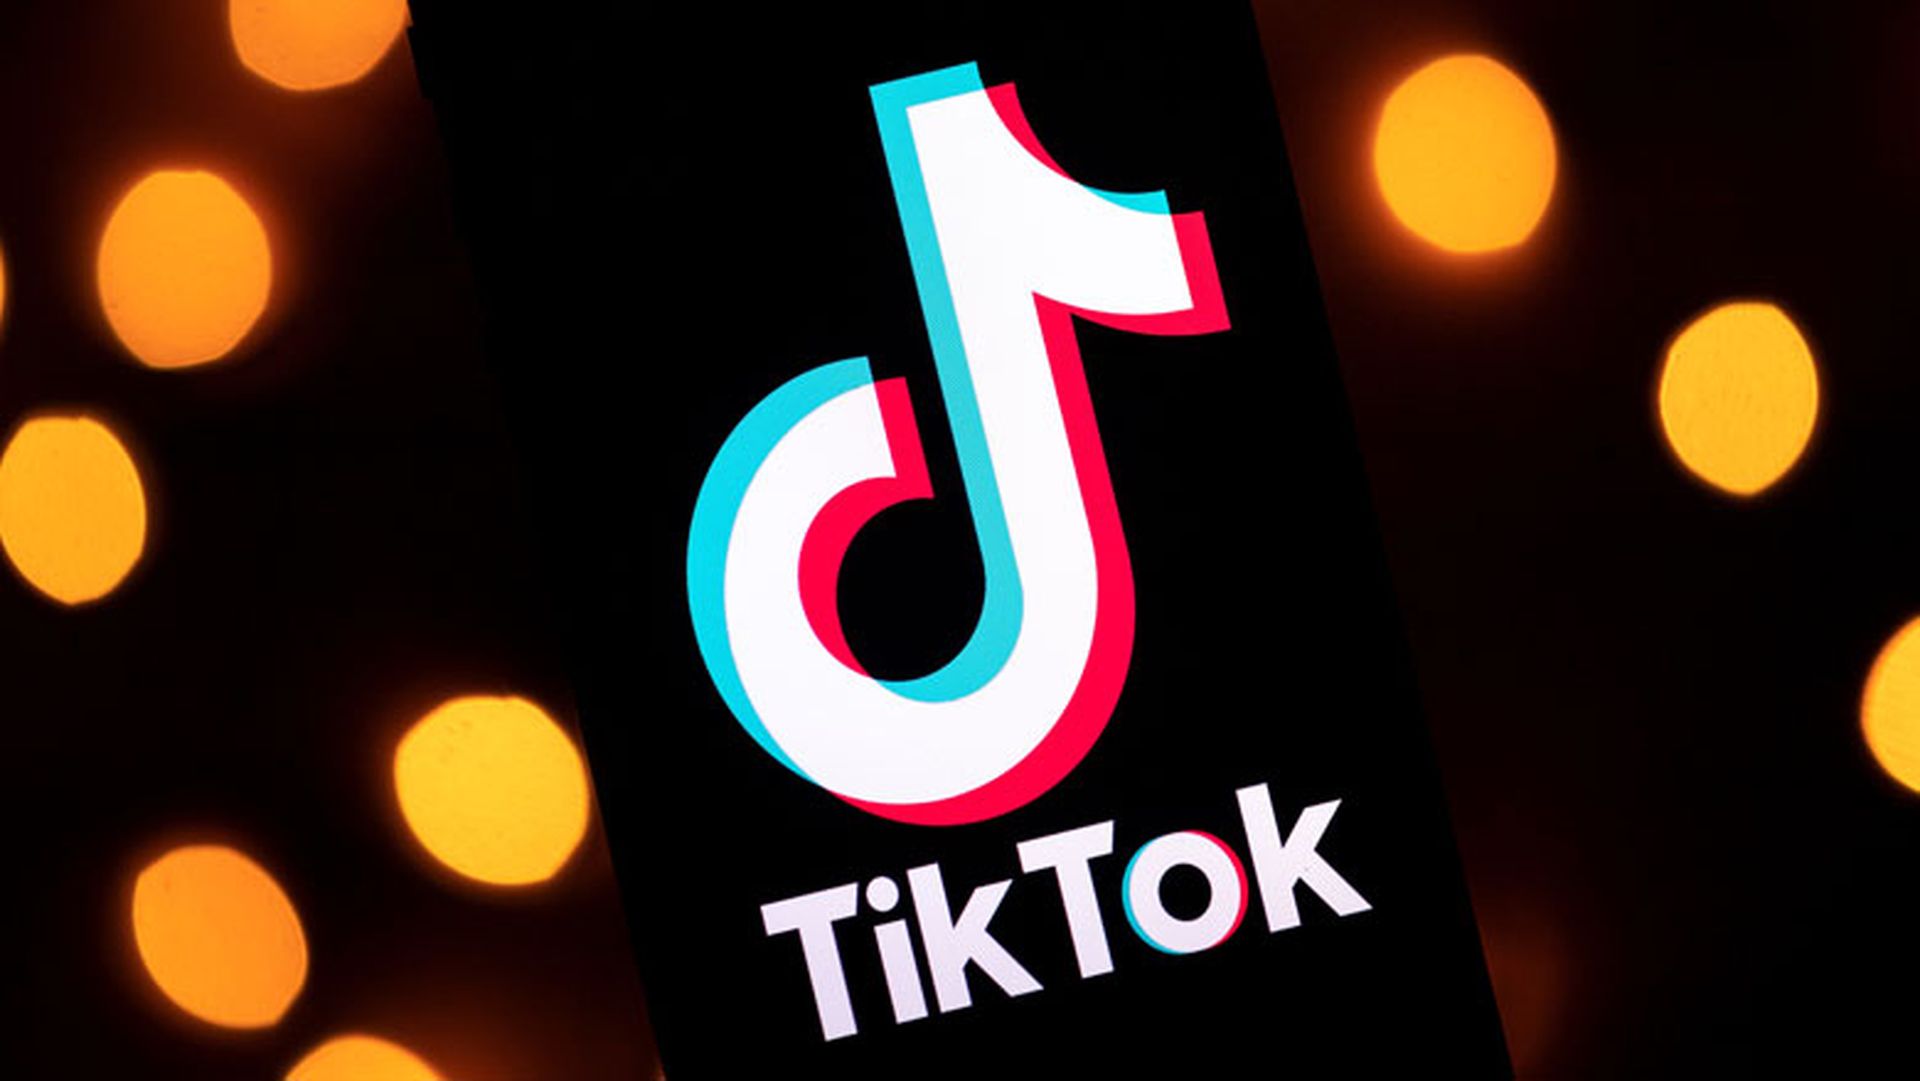 Today, we are going to be covering how to watch deleted TikToks in 2022, so you can watch some old TikTok videos that you can't find on the app anymore.